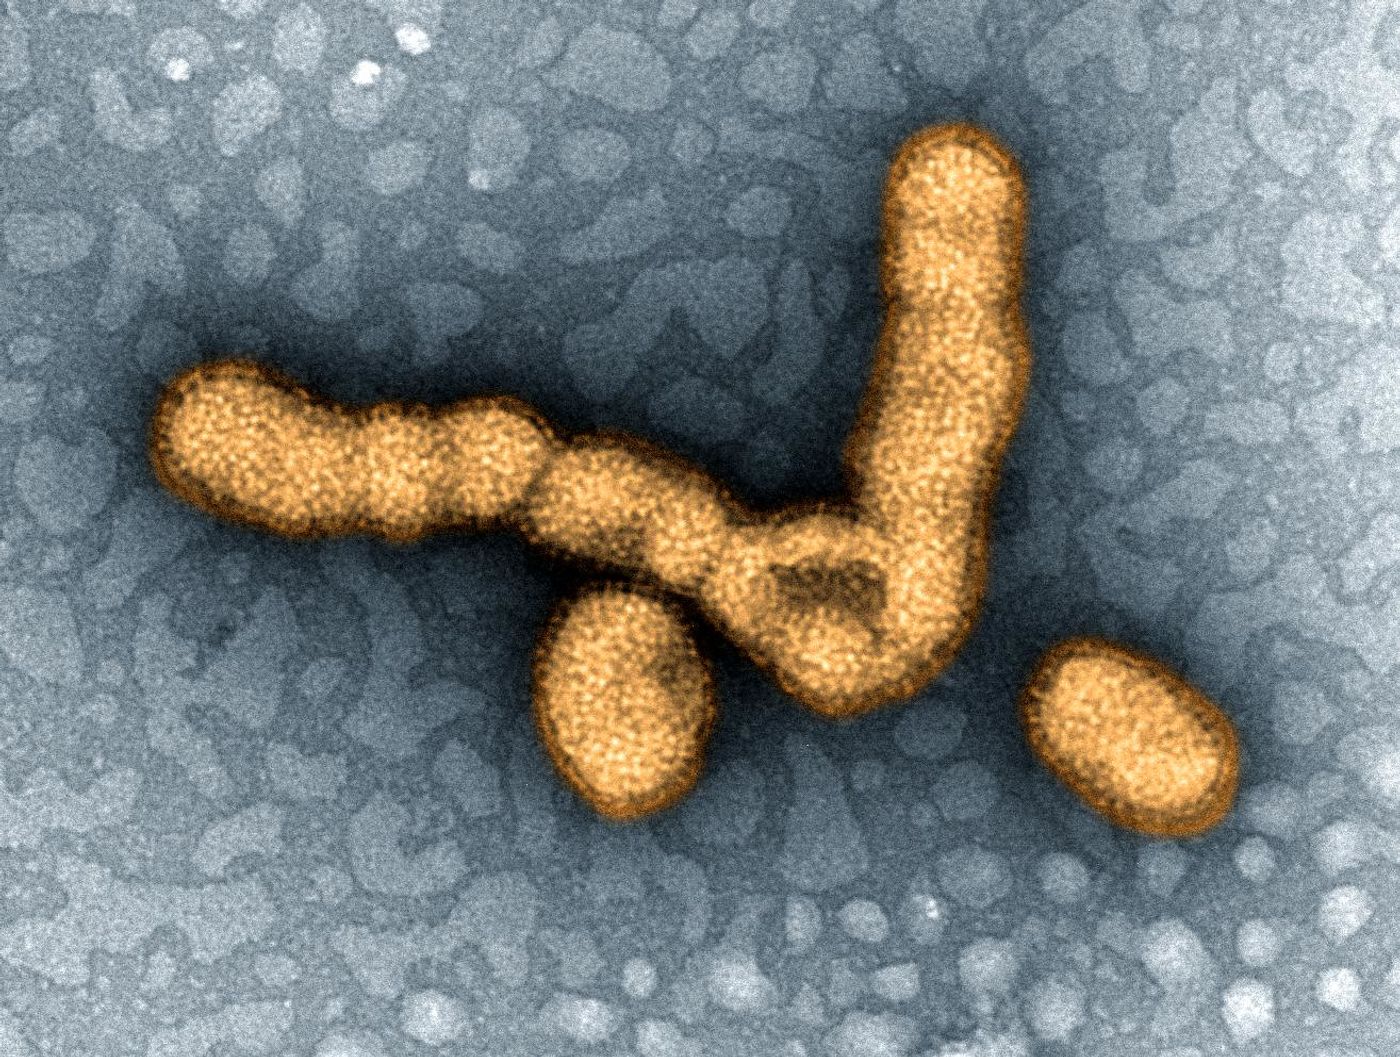 Colorized transmission electron micrograph showing H1N1 influenza virus particles. Credit: NIAID